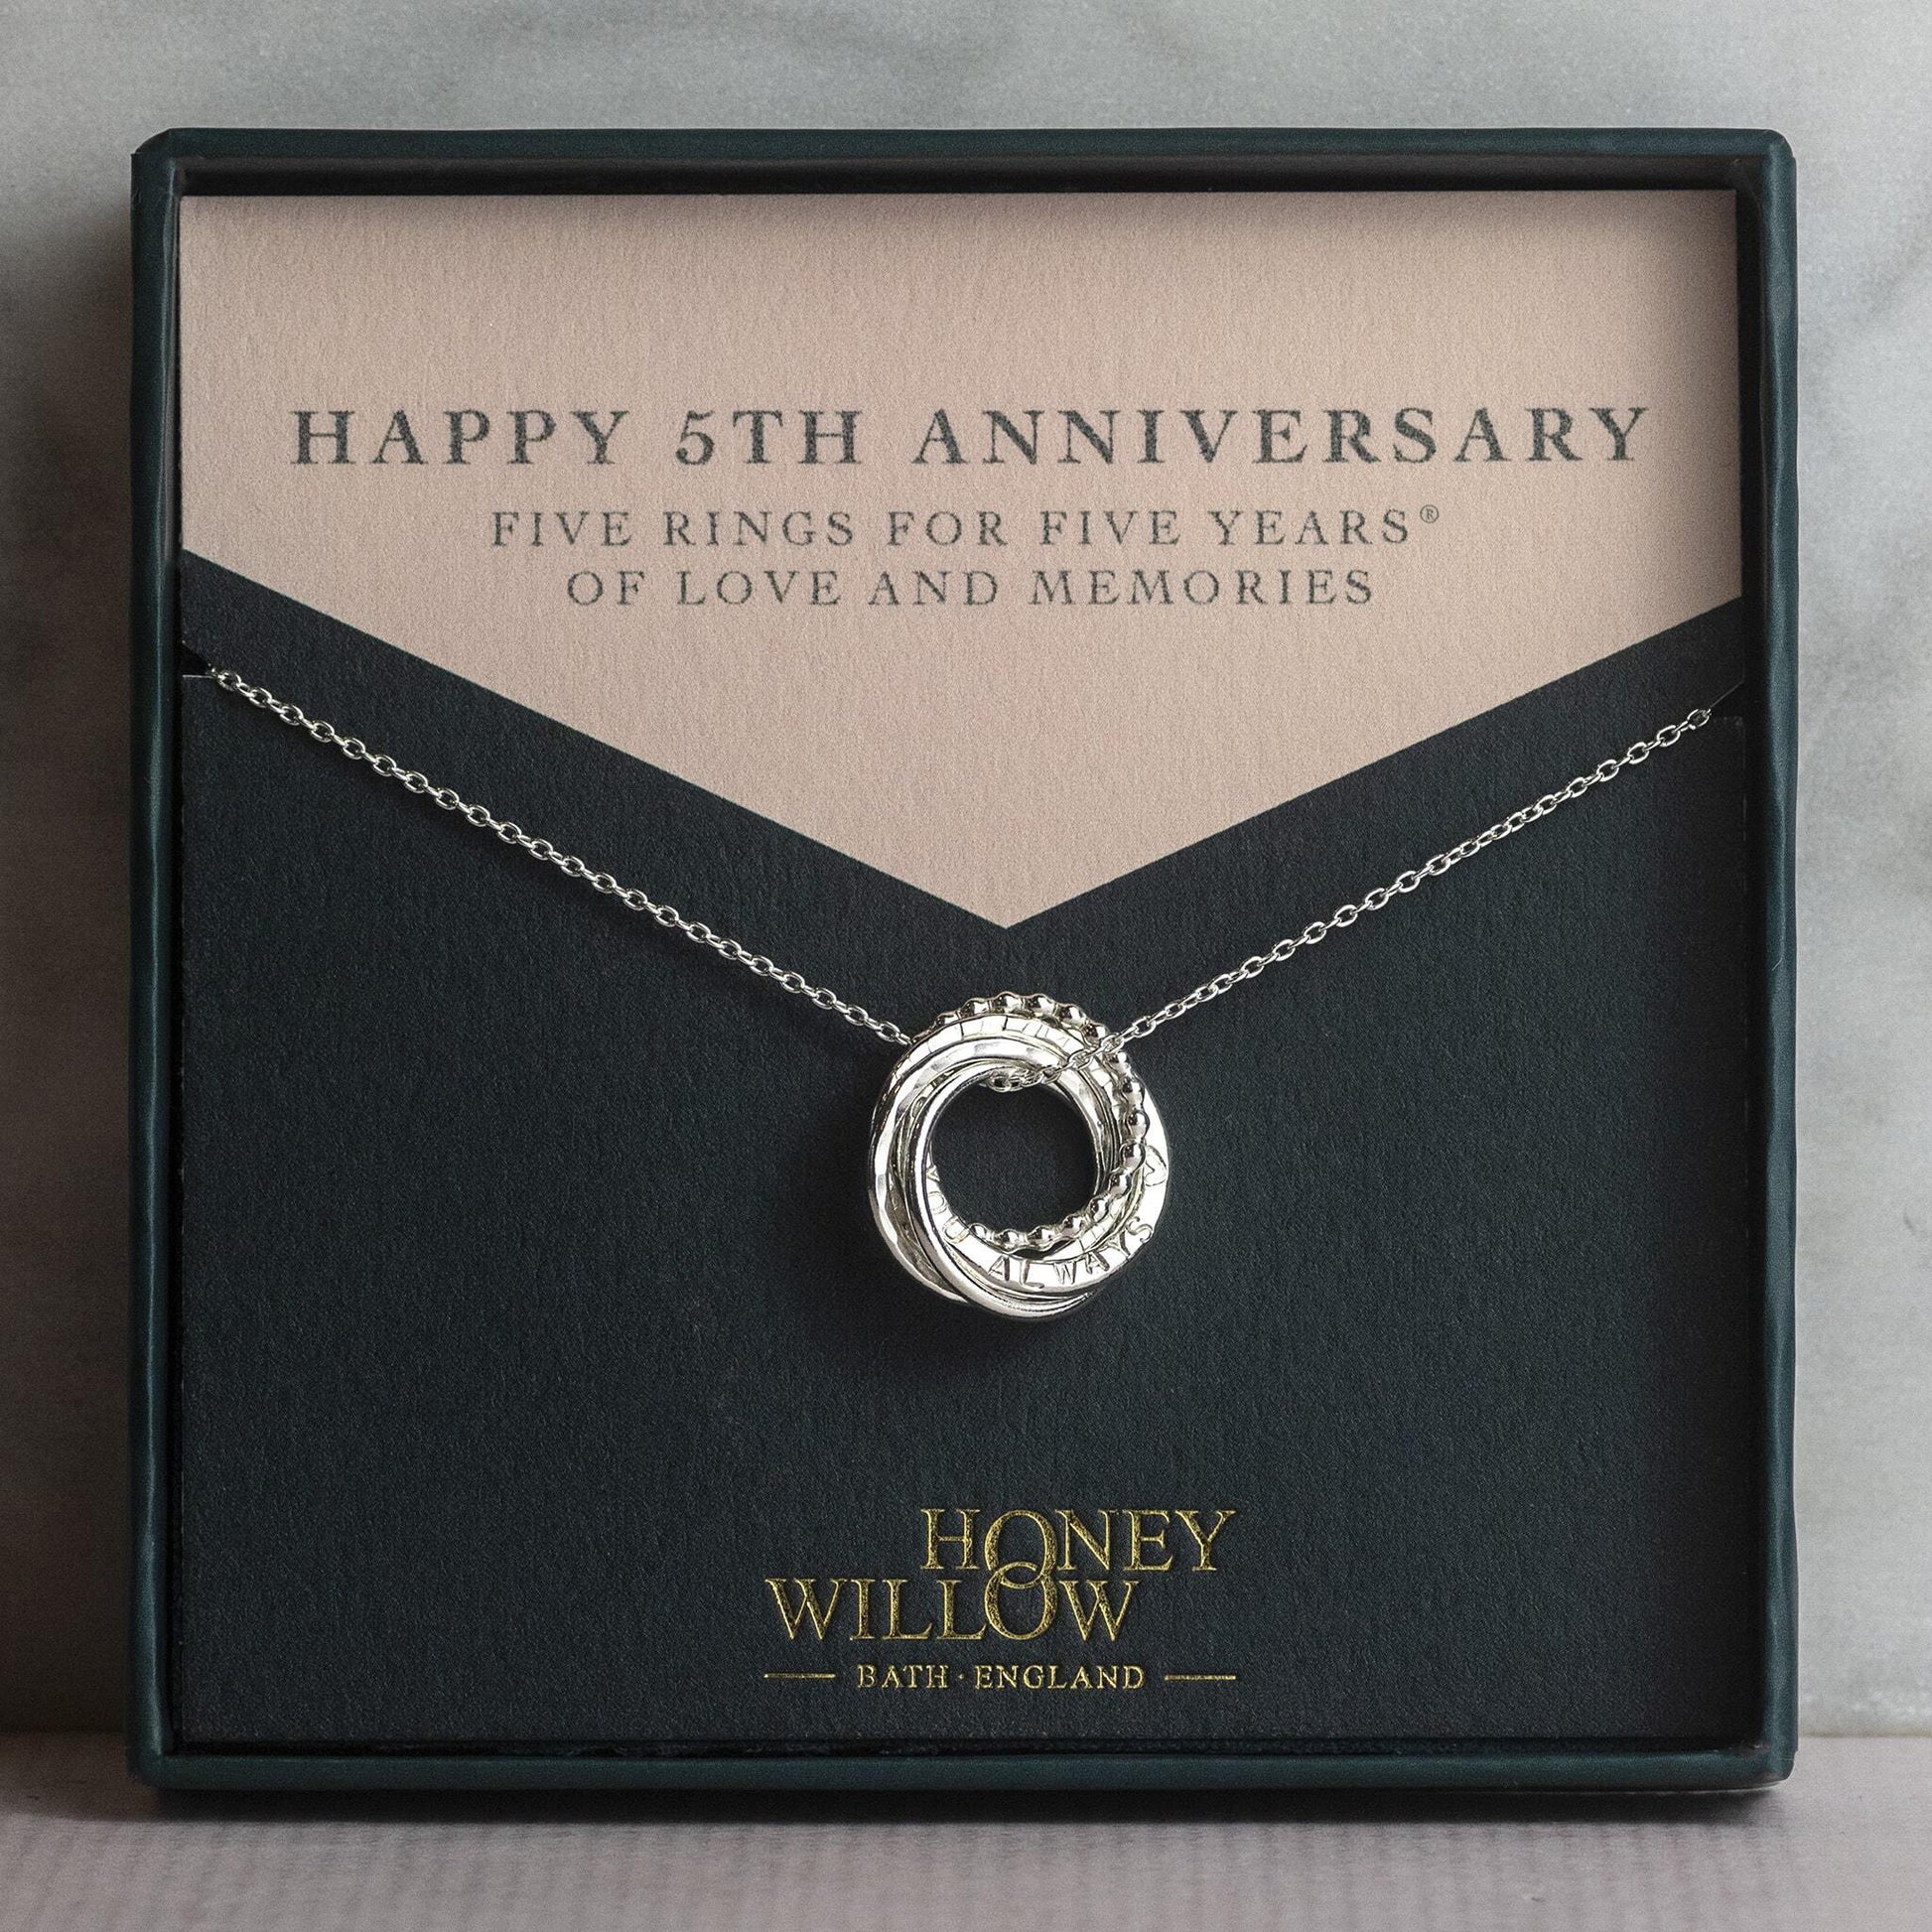 Personalised 5th Anniversary Necklace - Hand-Stamped - The Original 5 Rings for 5 Years Necklace - Petite Silver